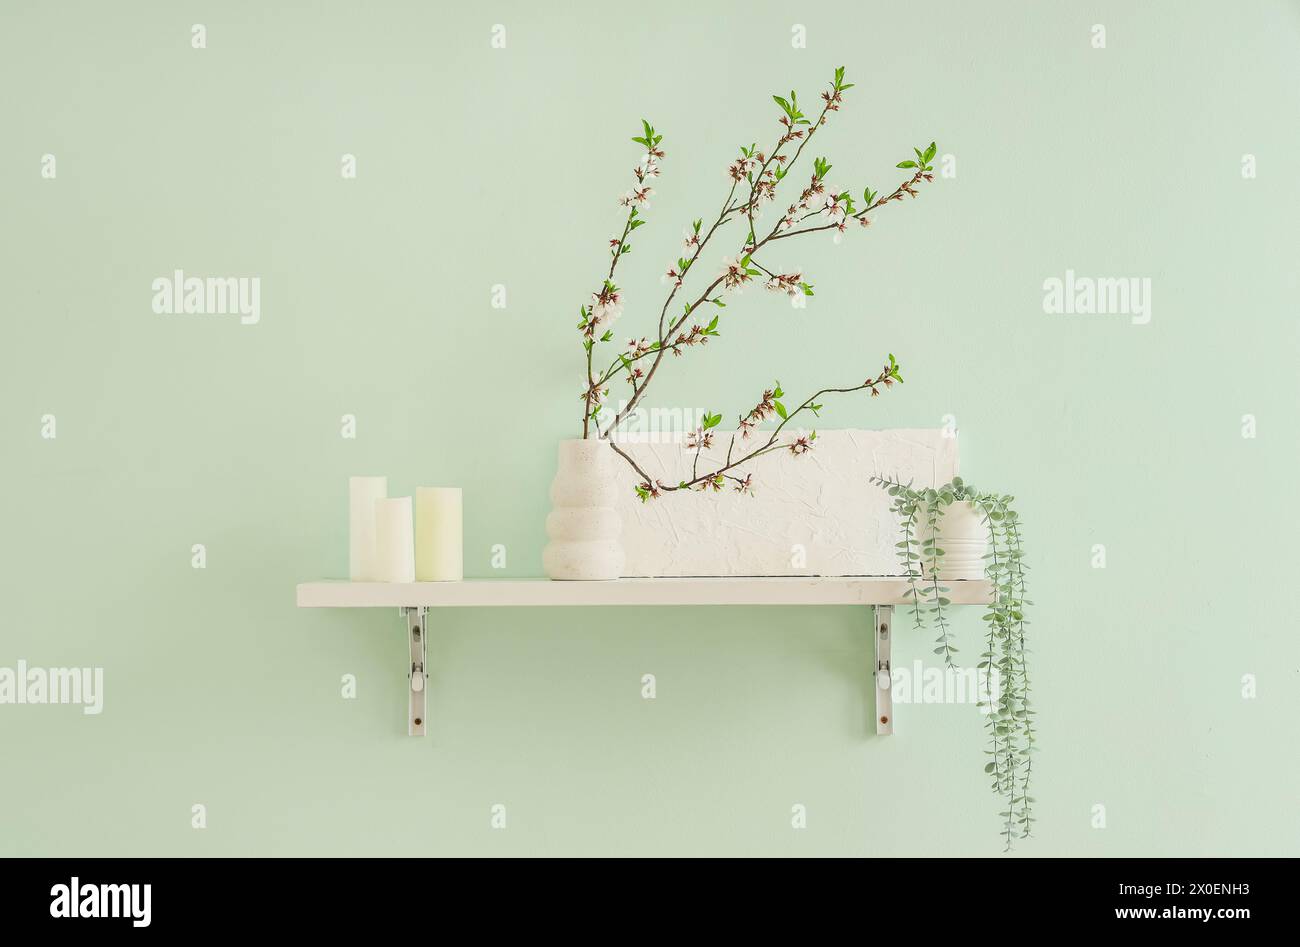 Shelf with houseplant and blooming branches hanging on green wall, closeup Stock Photo